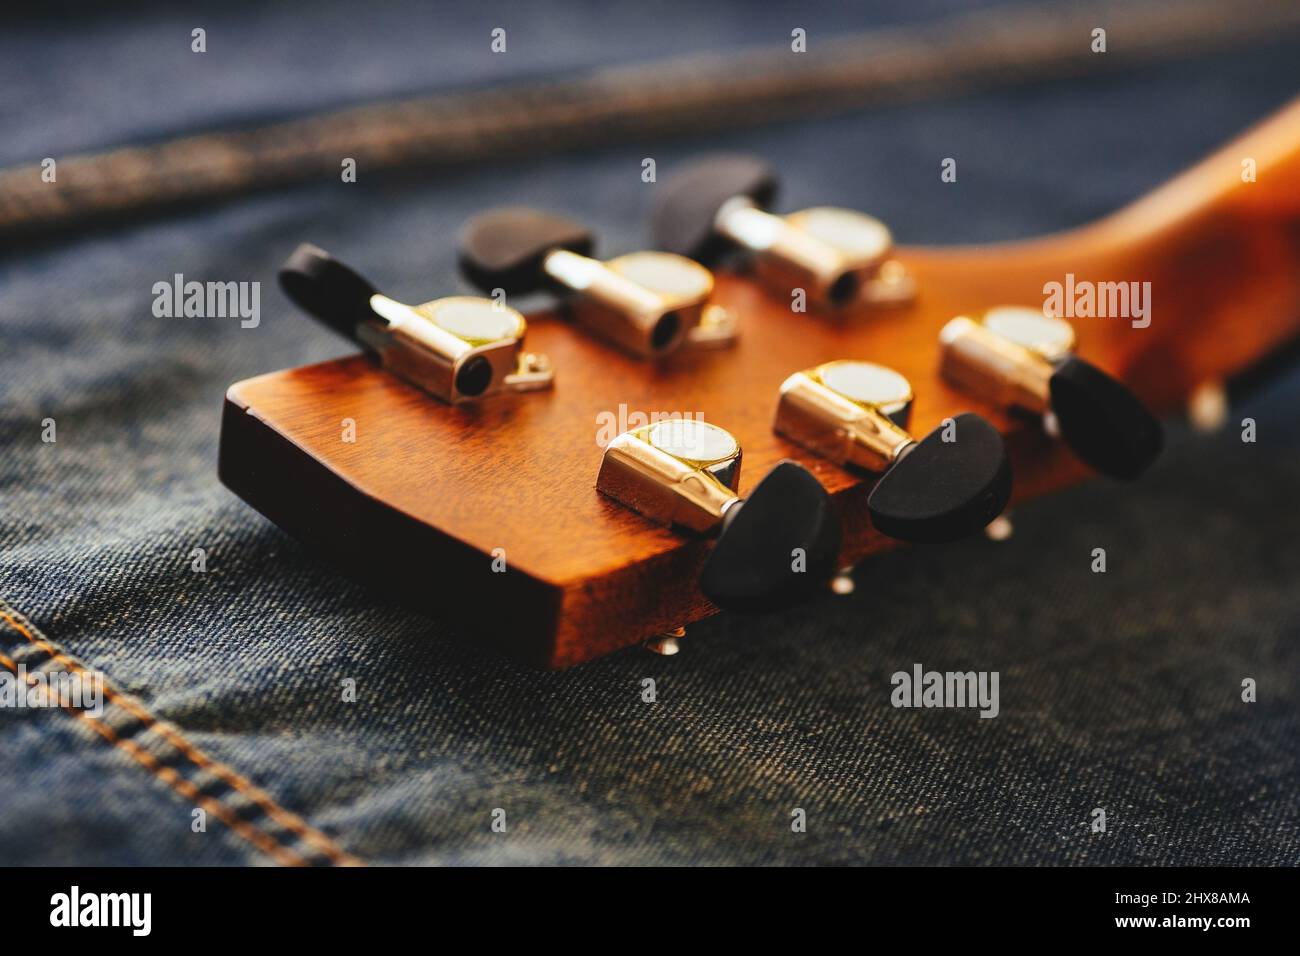 Neck of acoustic guitar is close-up on denim fabric. Hipster culture. Background. Musical instrument. Learning to play guitar. Stock Photo